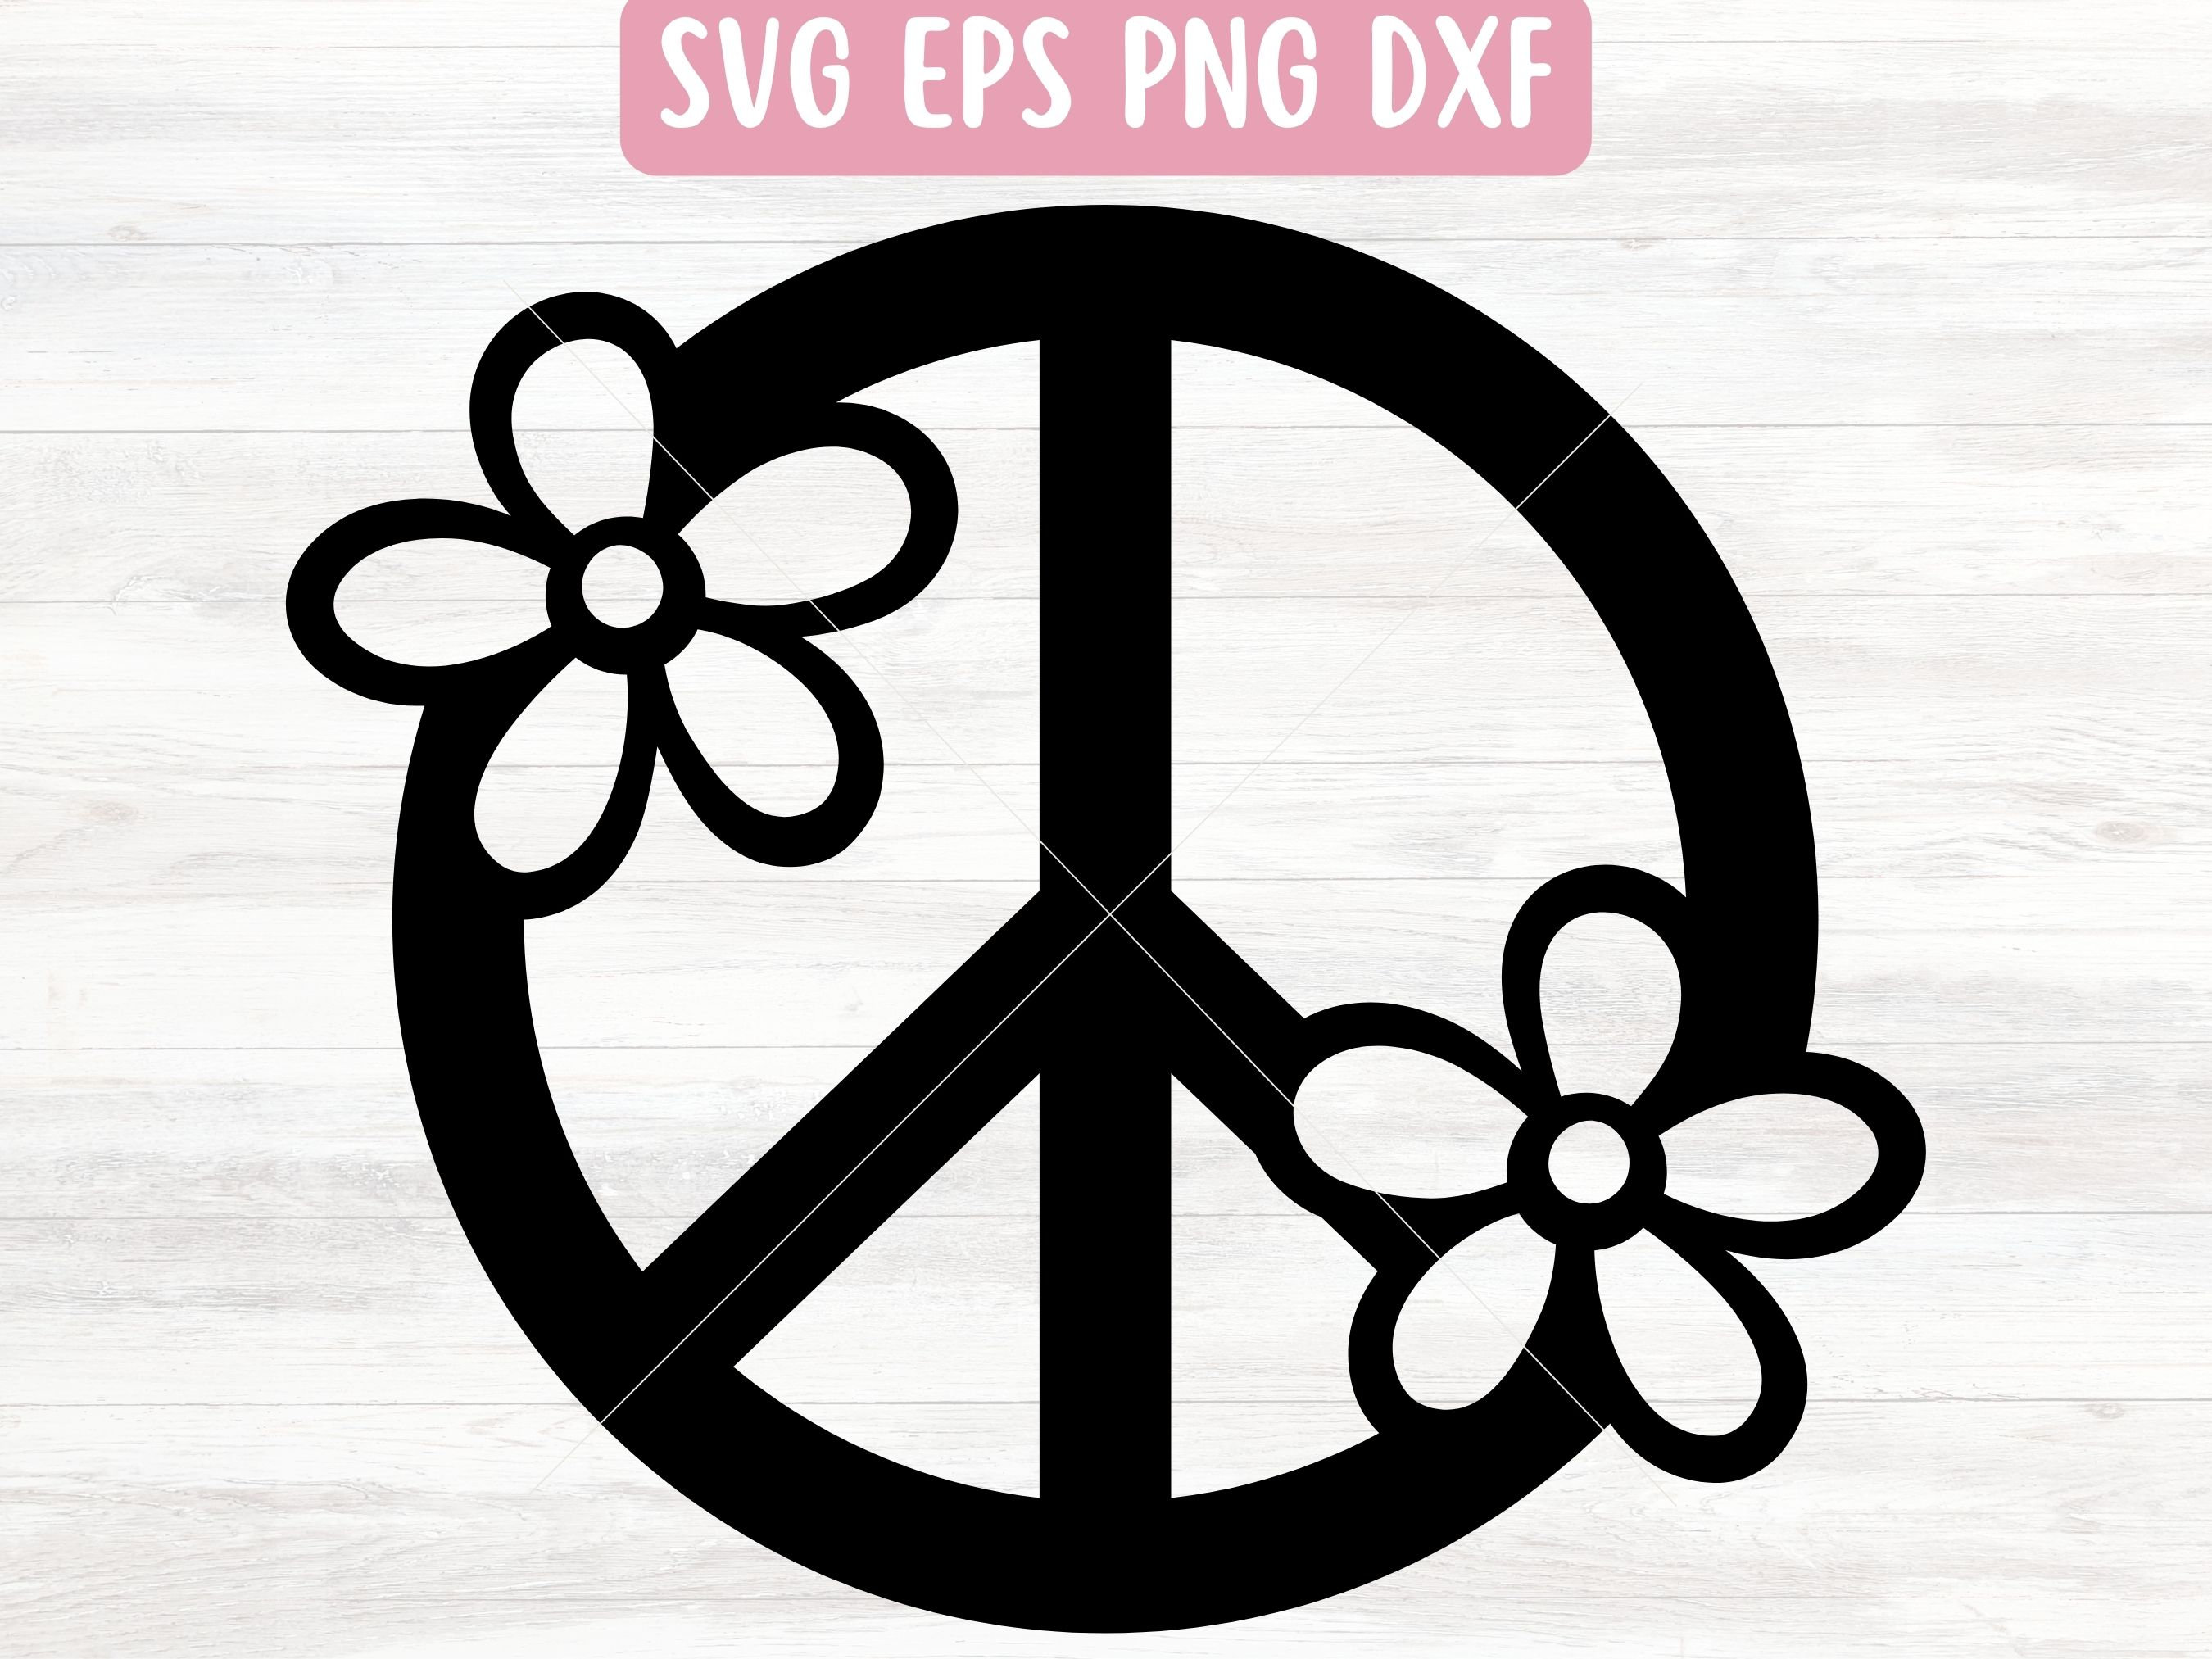 9 in 1 Peace/Hippie/Hippy 60's Symbols STENCIL Flowers/Hearts/Smiley  Face